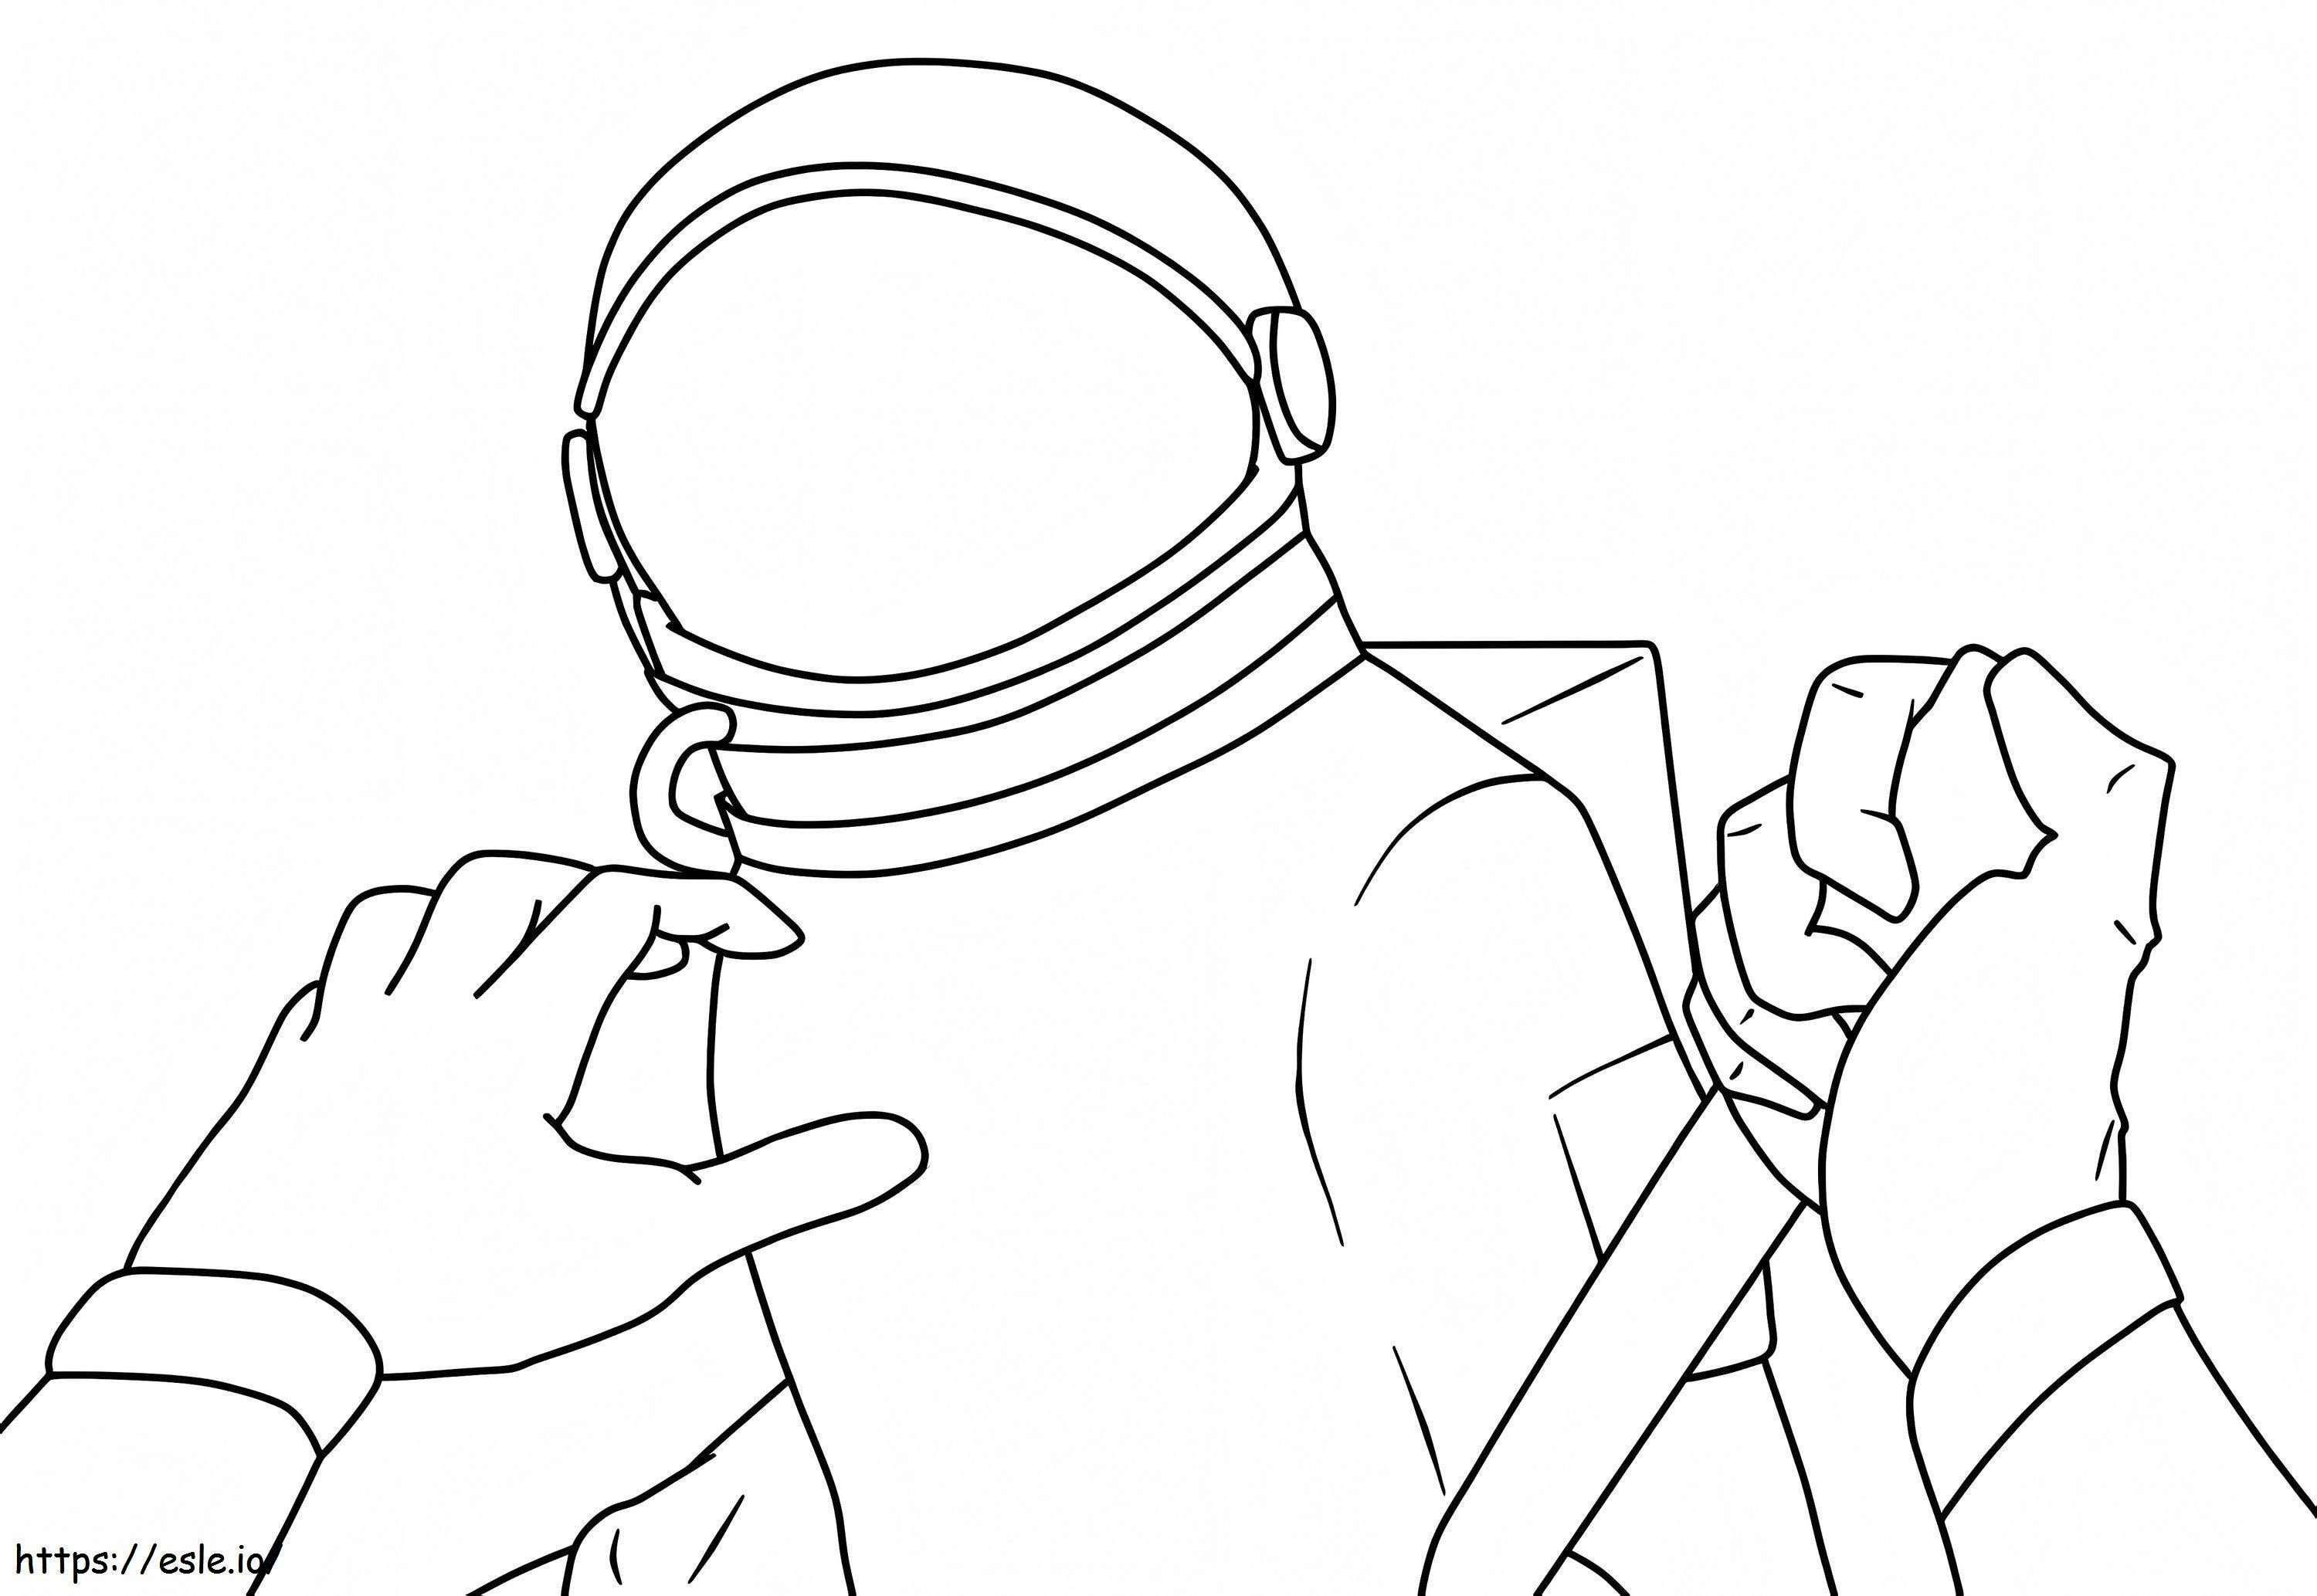 Among Us 34 coloring page